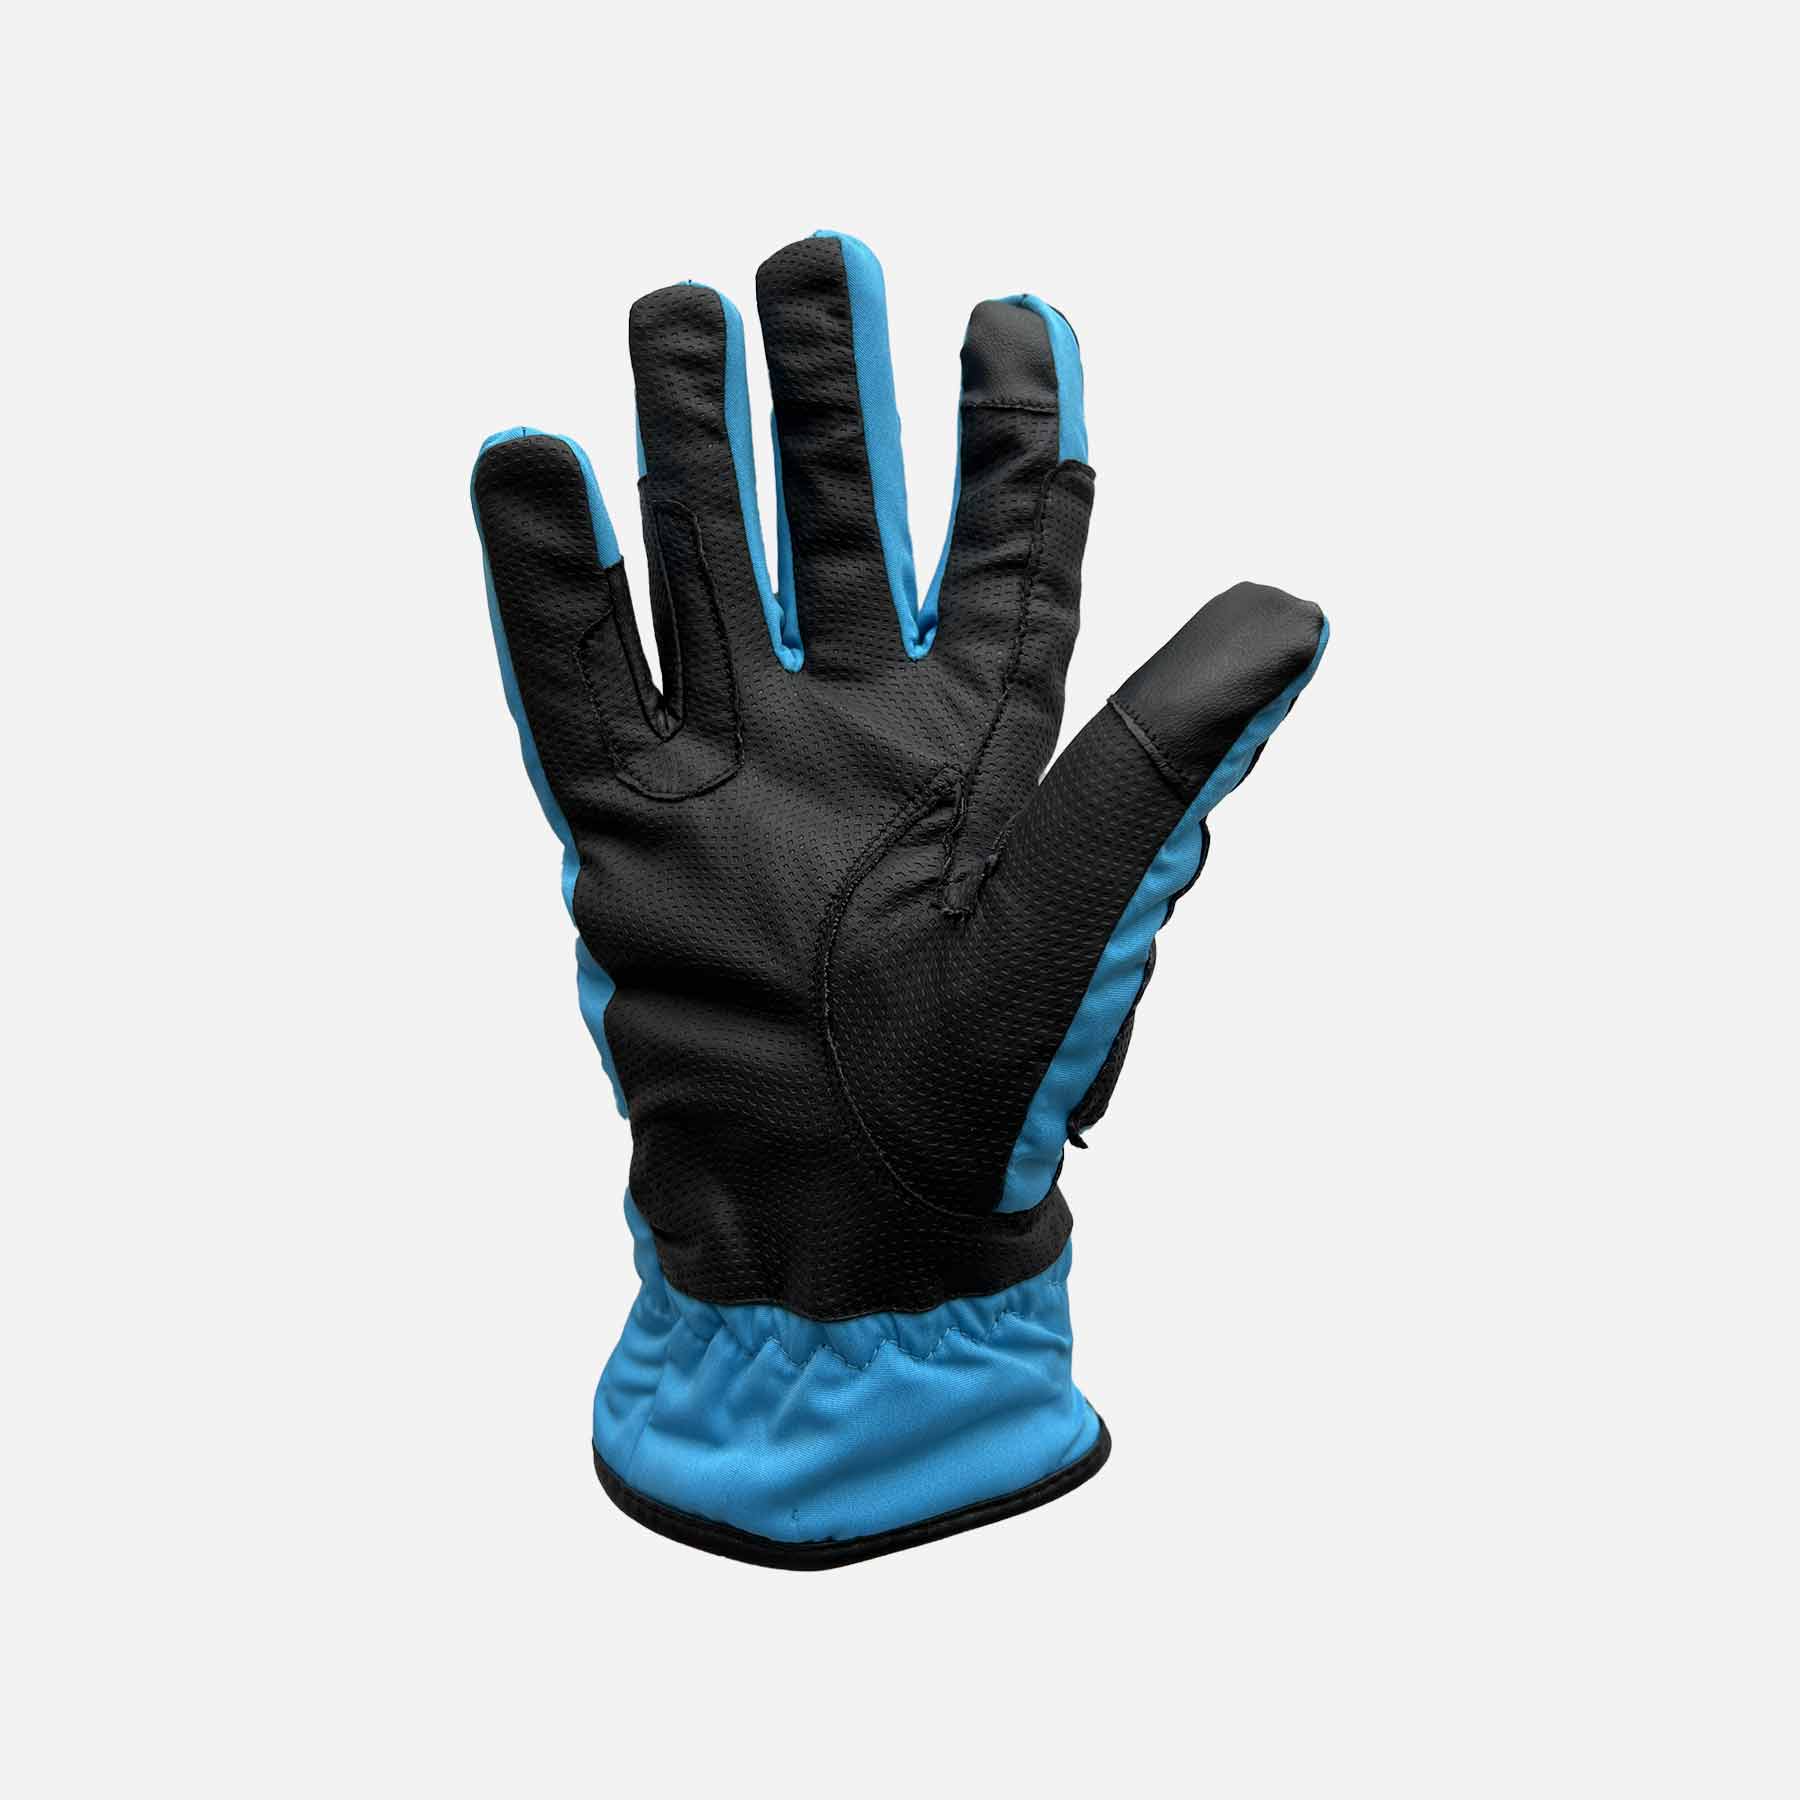 Just Chaps Waterproof Riding Gloves